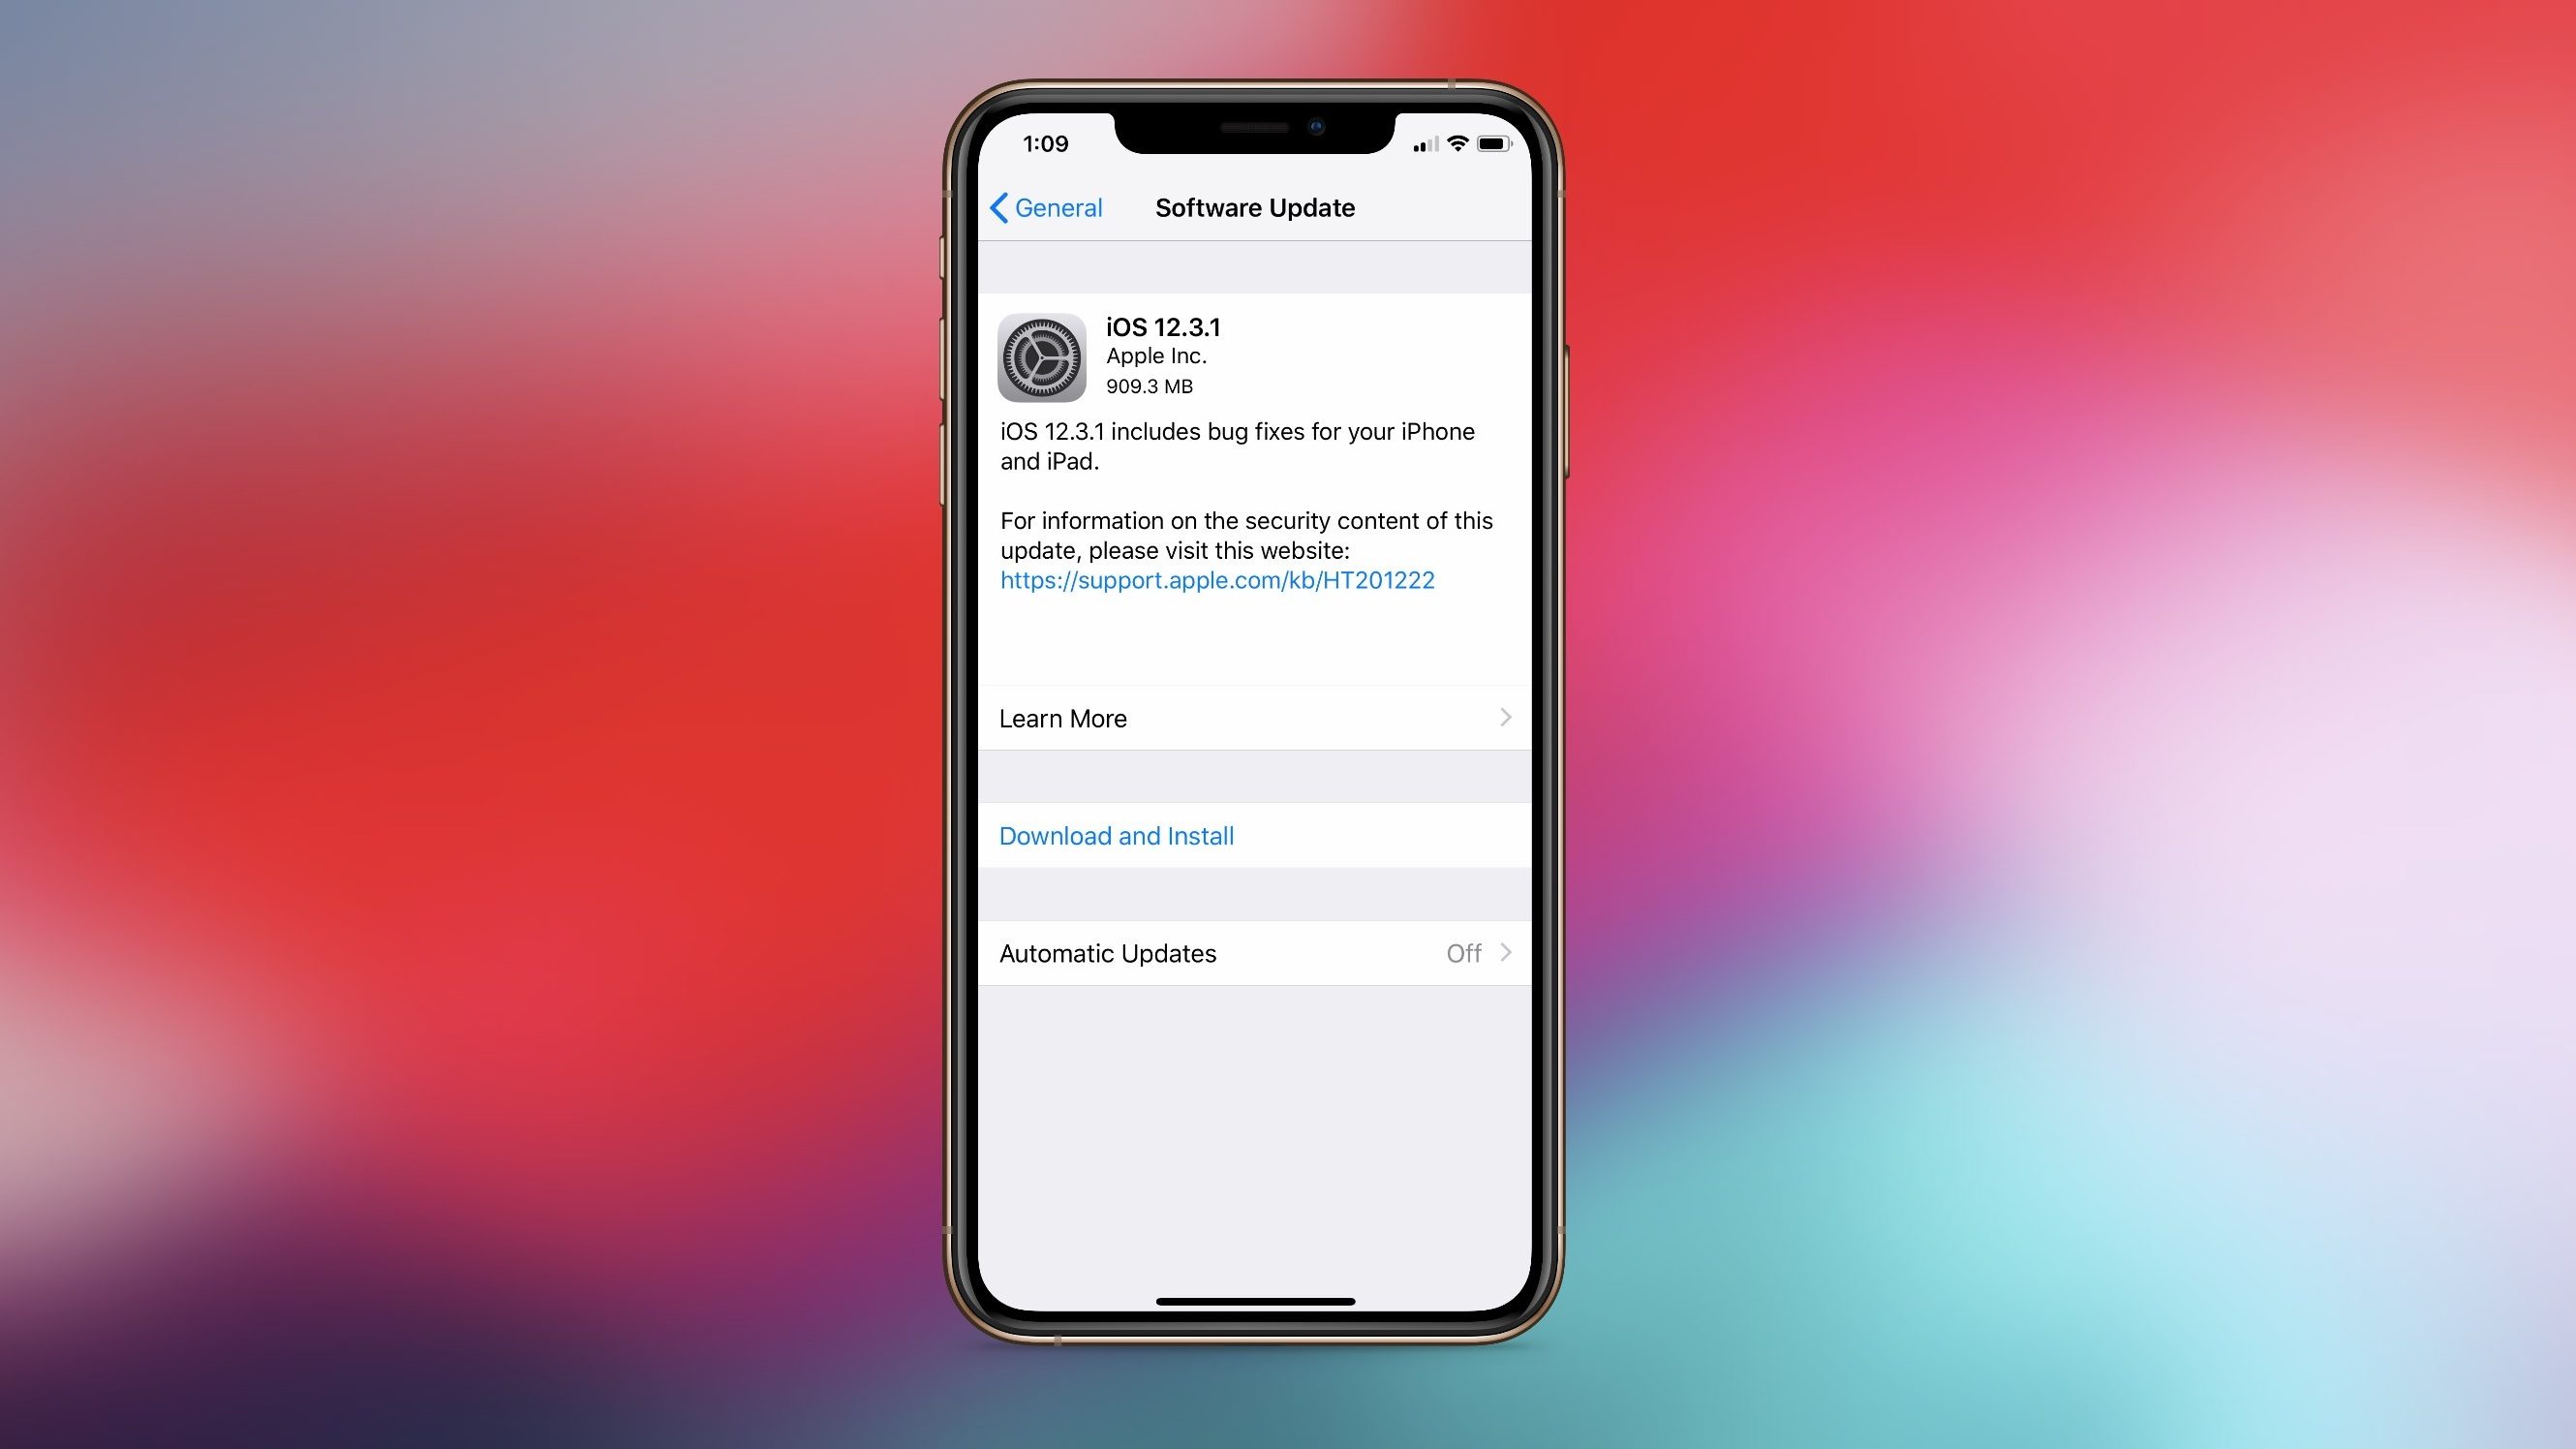 Will Apple iOS 13 fix bugs in the iPhone from iOS 12.3.1 update?